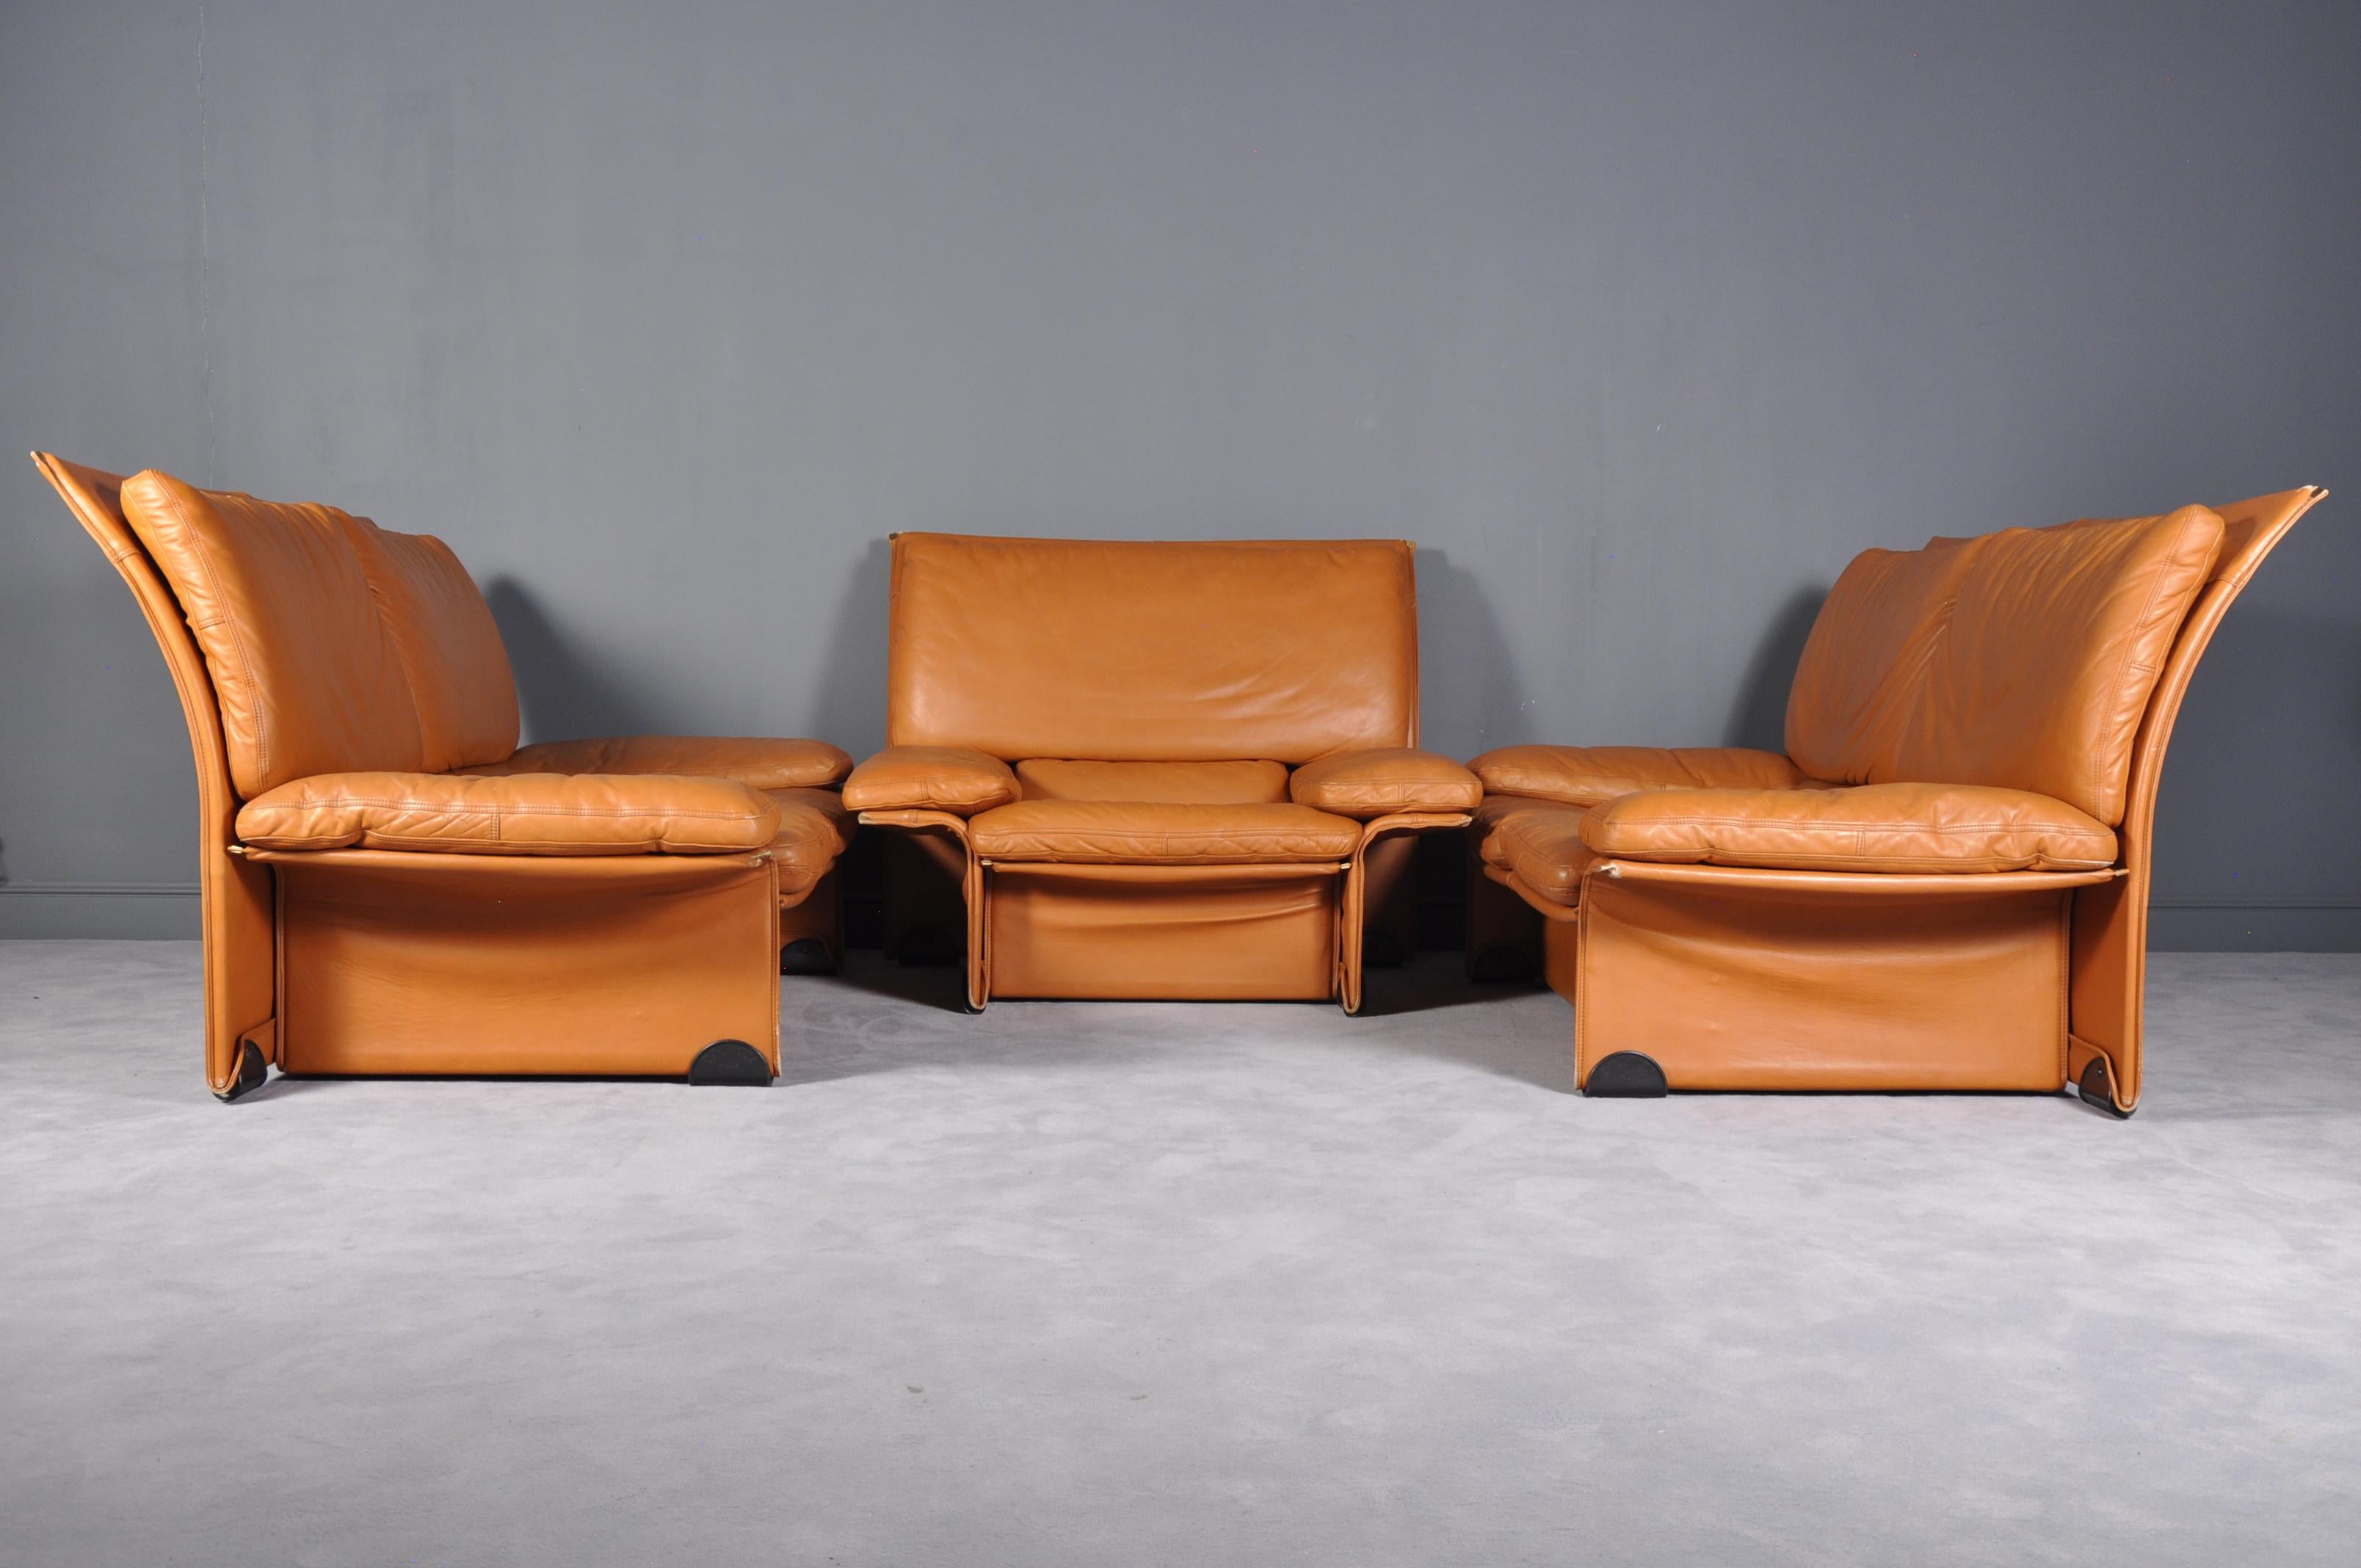 The high quality leather sofa set is designed by Titiana Ammannati & Giampiero Vitelli in 1976 for Brunati, Italy
The sofa set consists of two pieces two-seat sofa, armchair and an ottoman.
Two sofa W 170 / D 95 / H 85 cm
Armchair W 110 / D 95 /